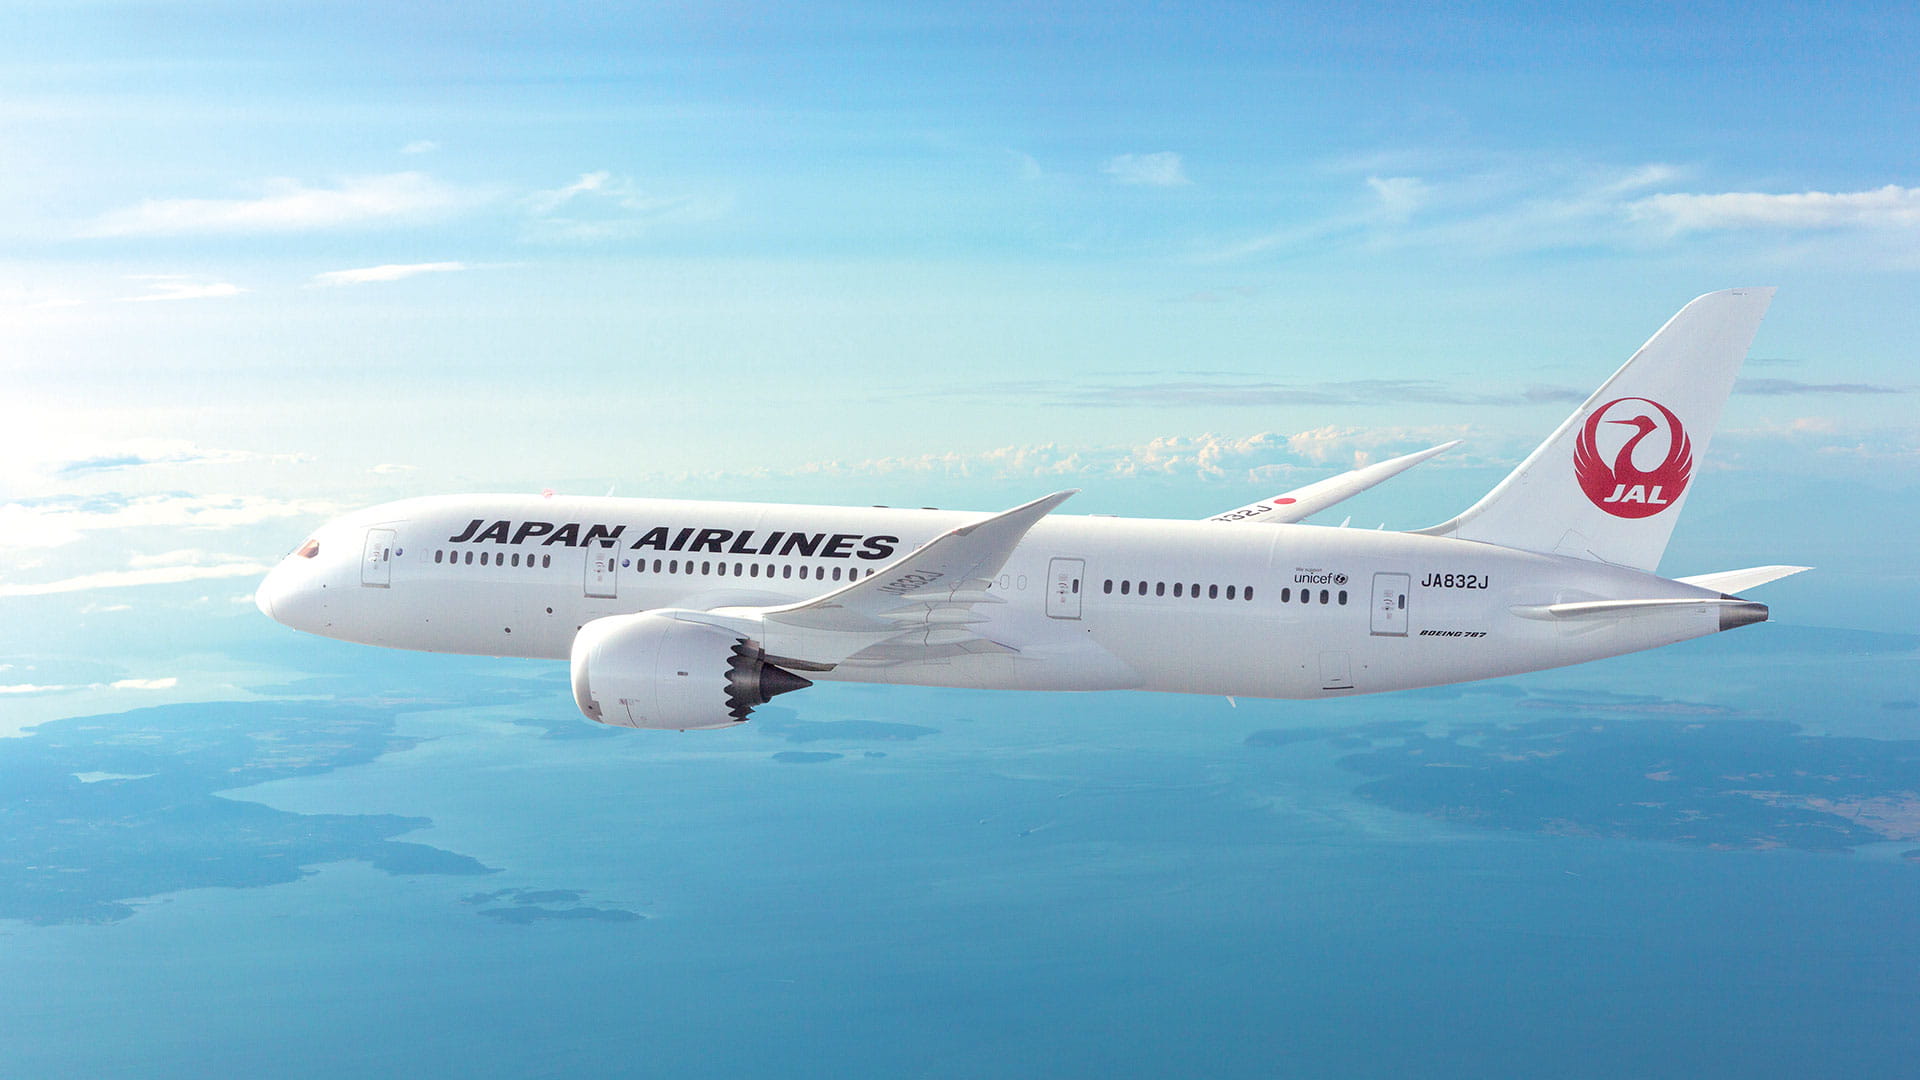 Collins Aerospace signs Dispatch agreement to support Japan Airlines 787 fleet